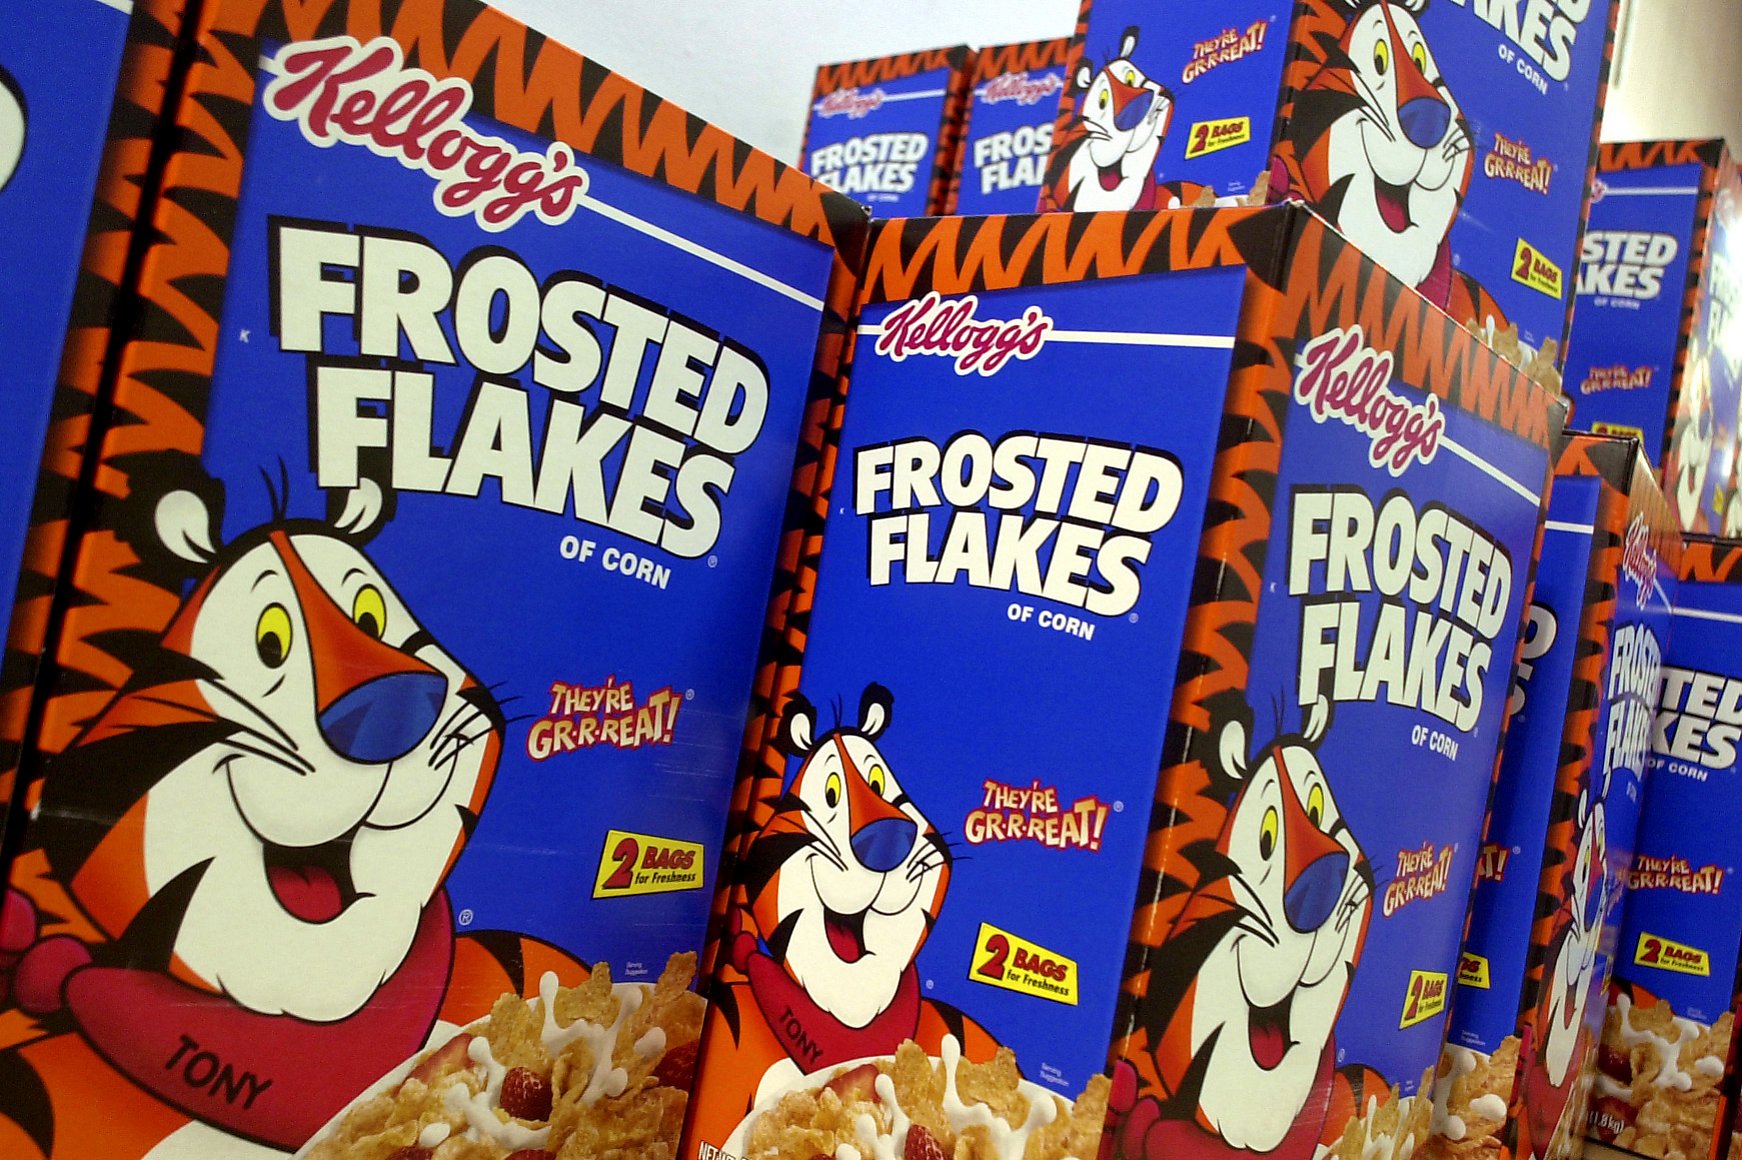 Kellogg is pulling its ads from the website Breitbart News, the conservativ...